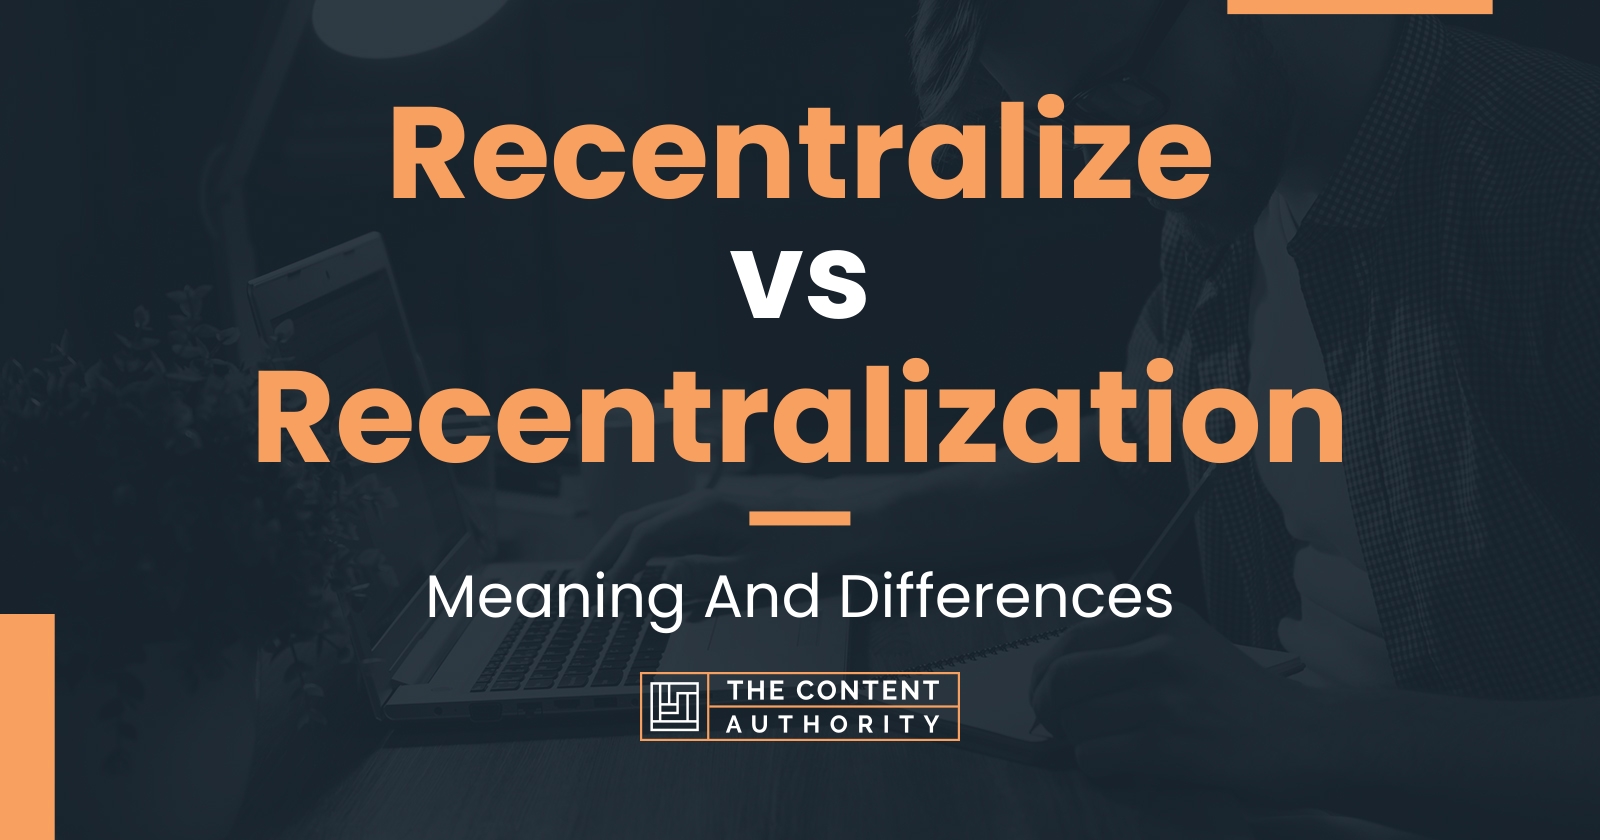 Recentralize vs Recentralization: Meaning And Differences